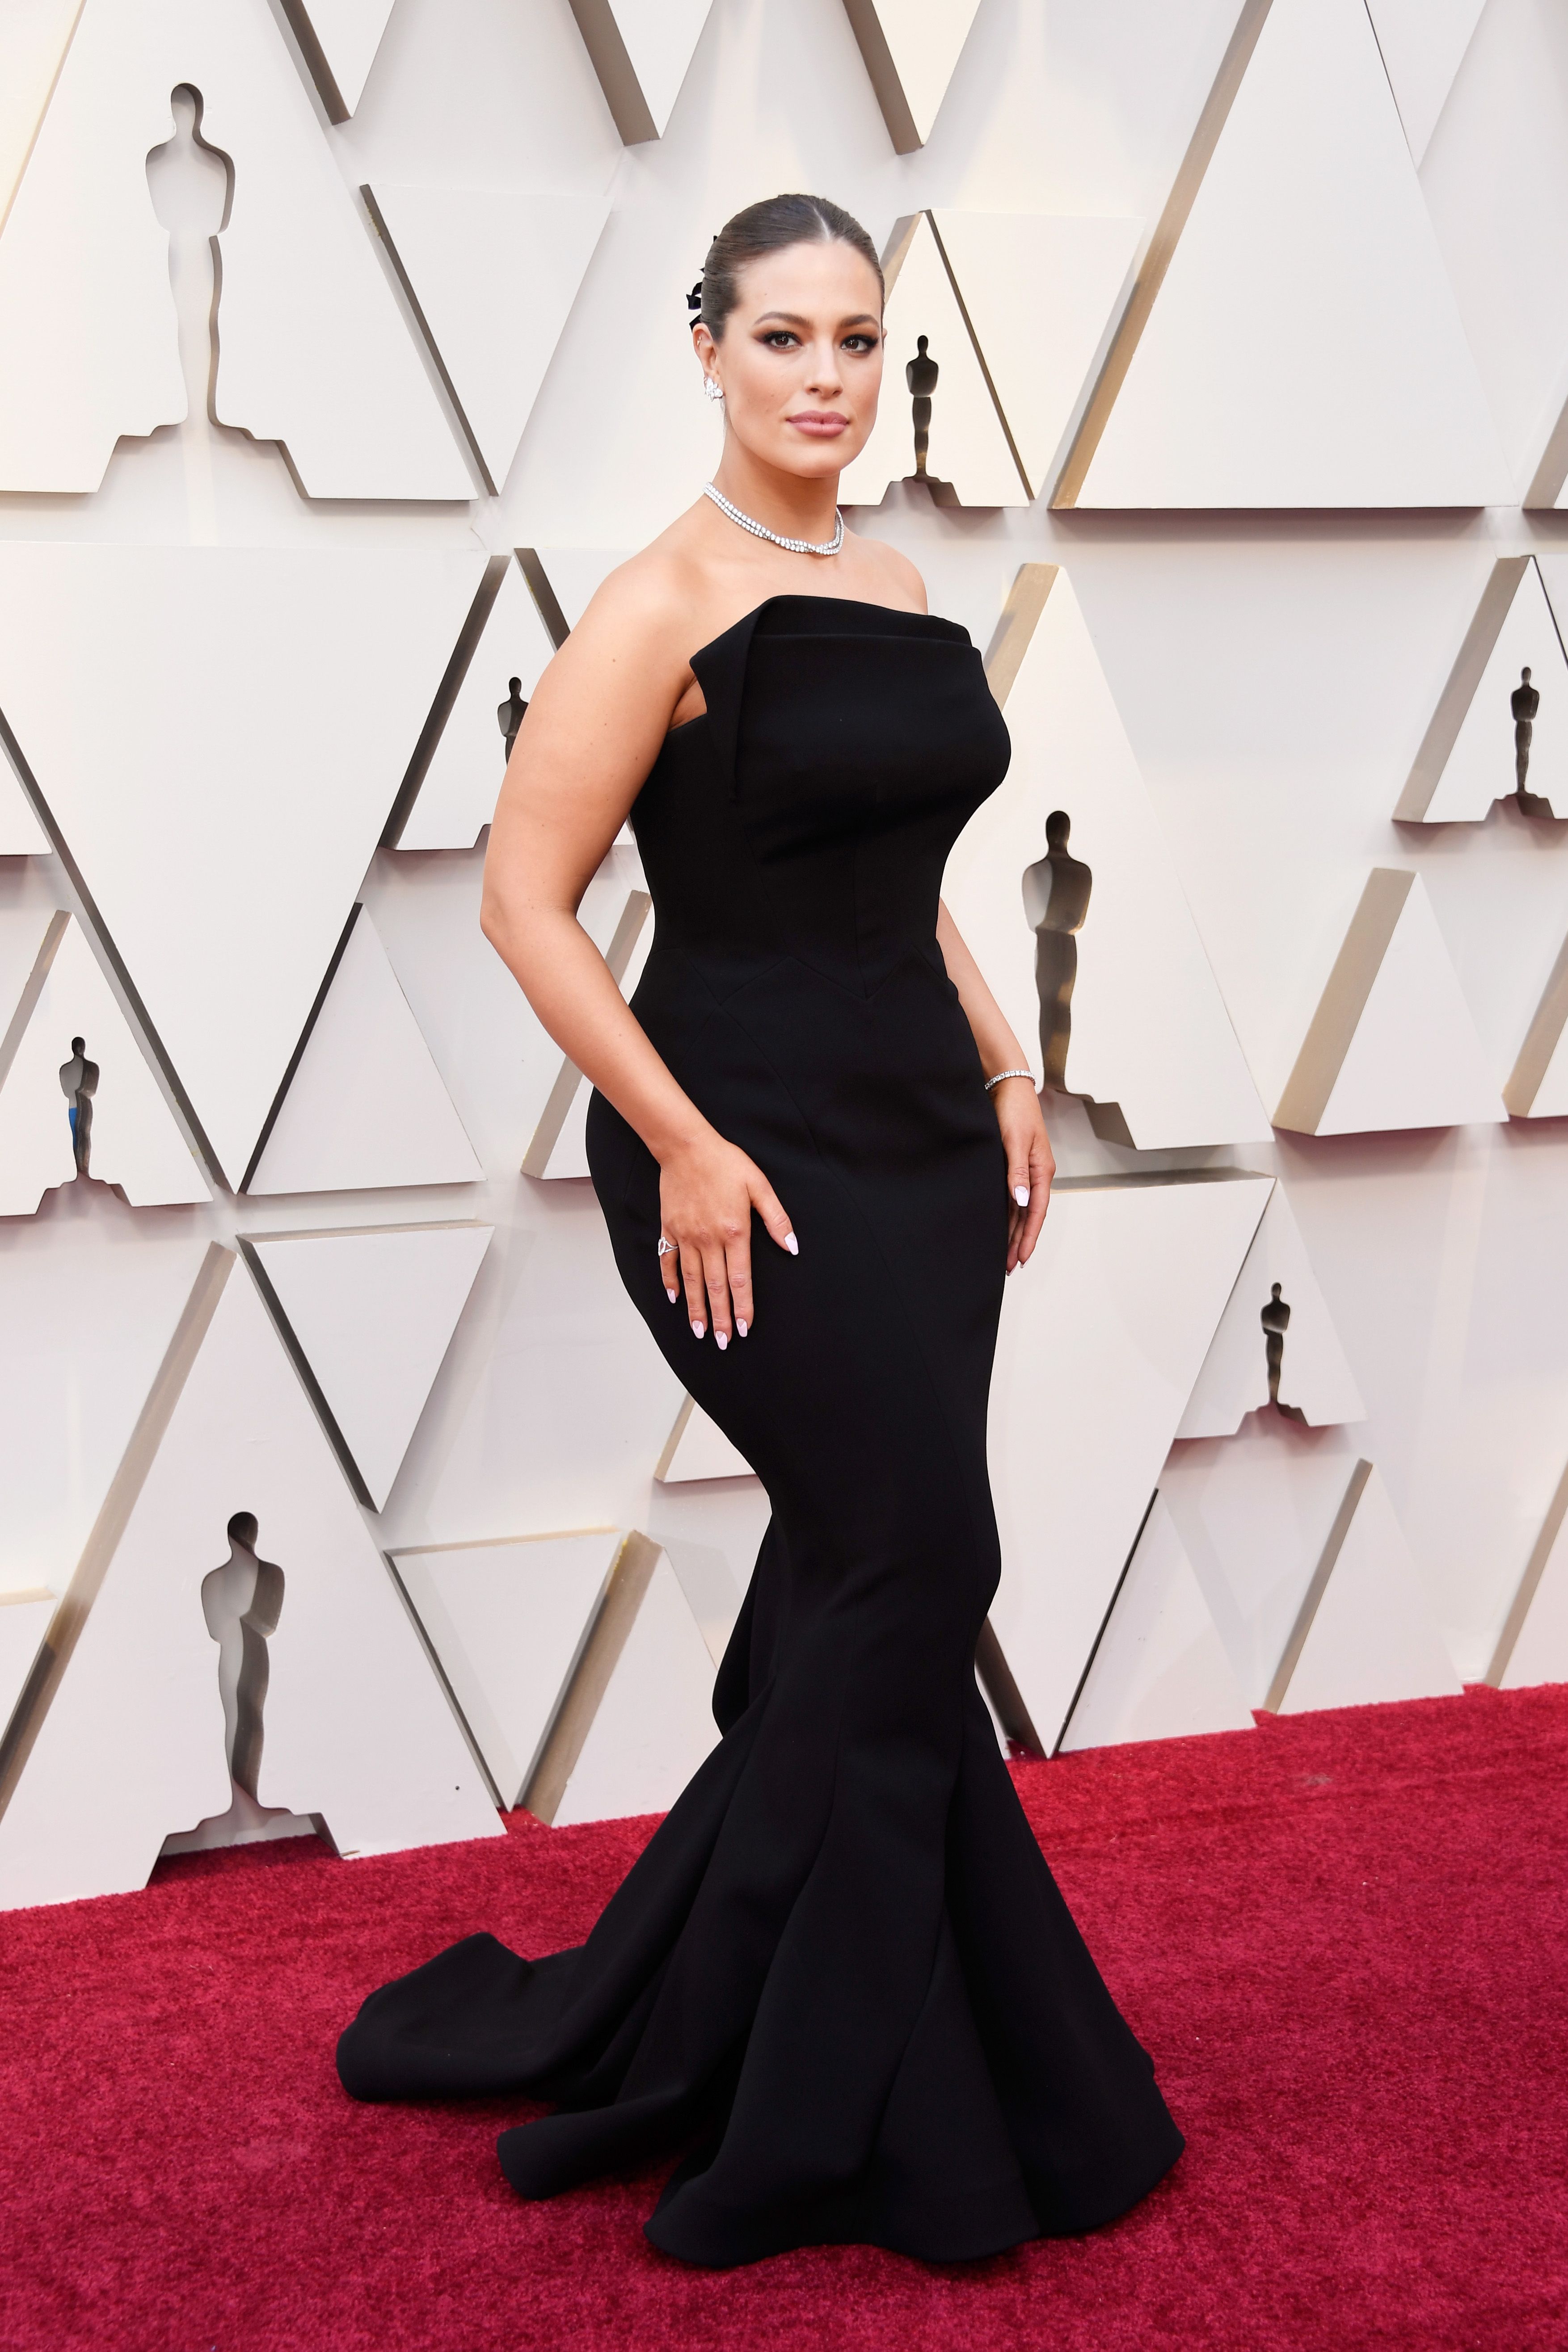 Red carpet fashion at the Oscars 2019